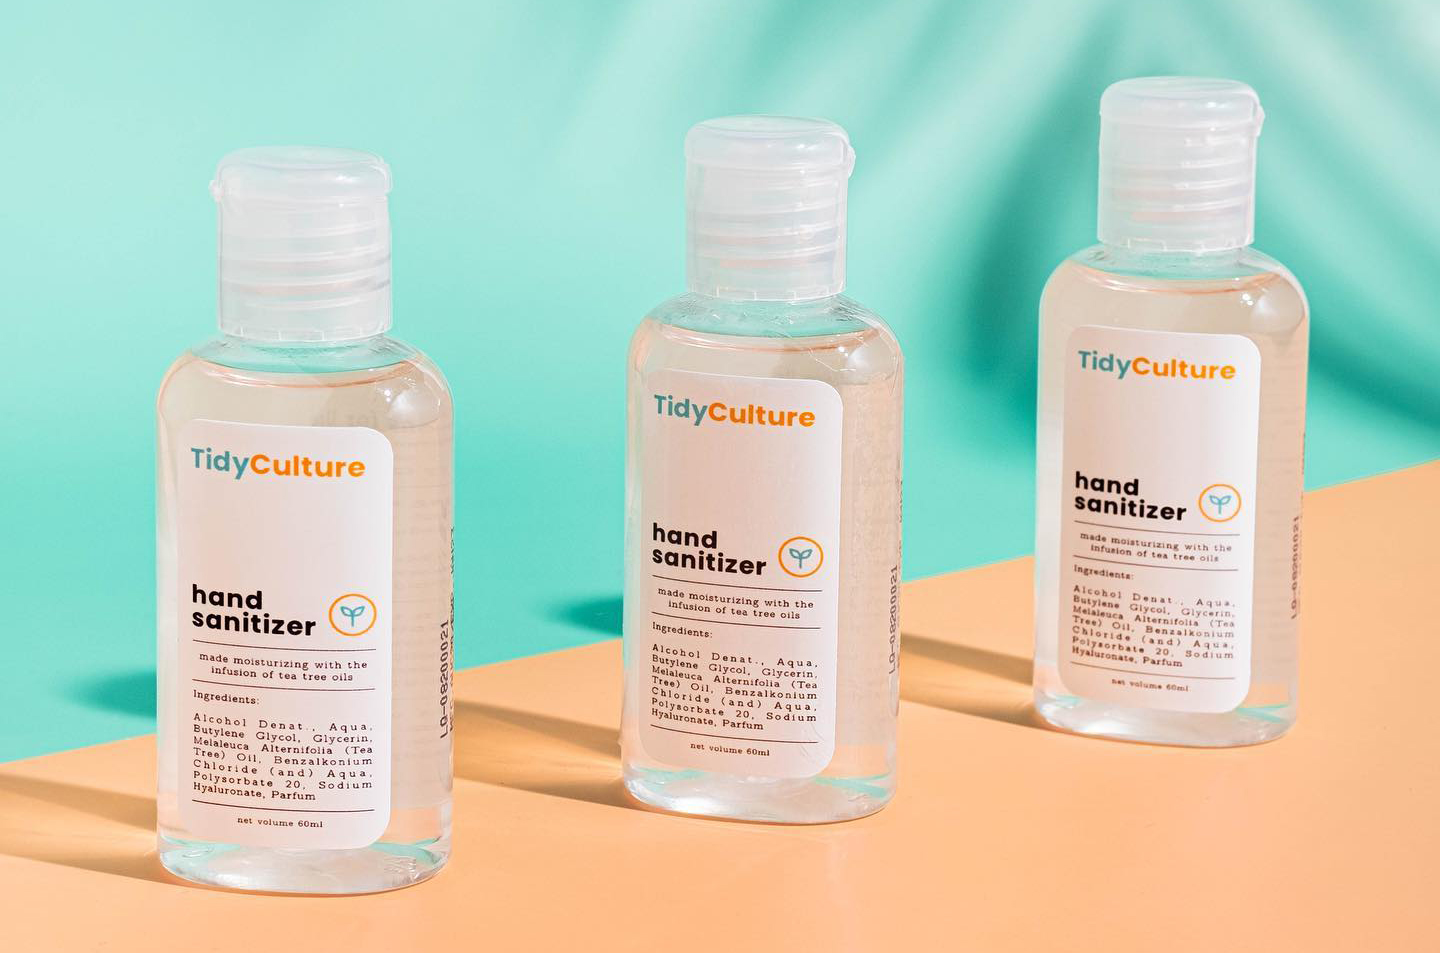 Tidy Culture hand sanitizer alcohol